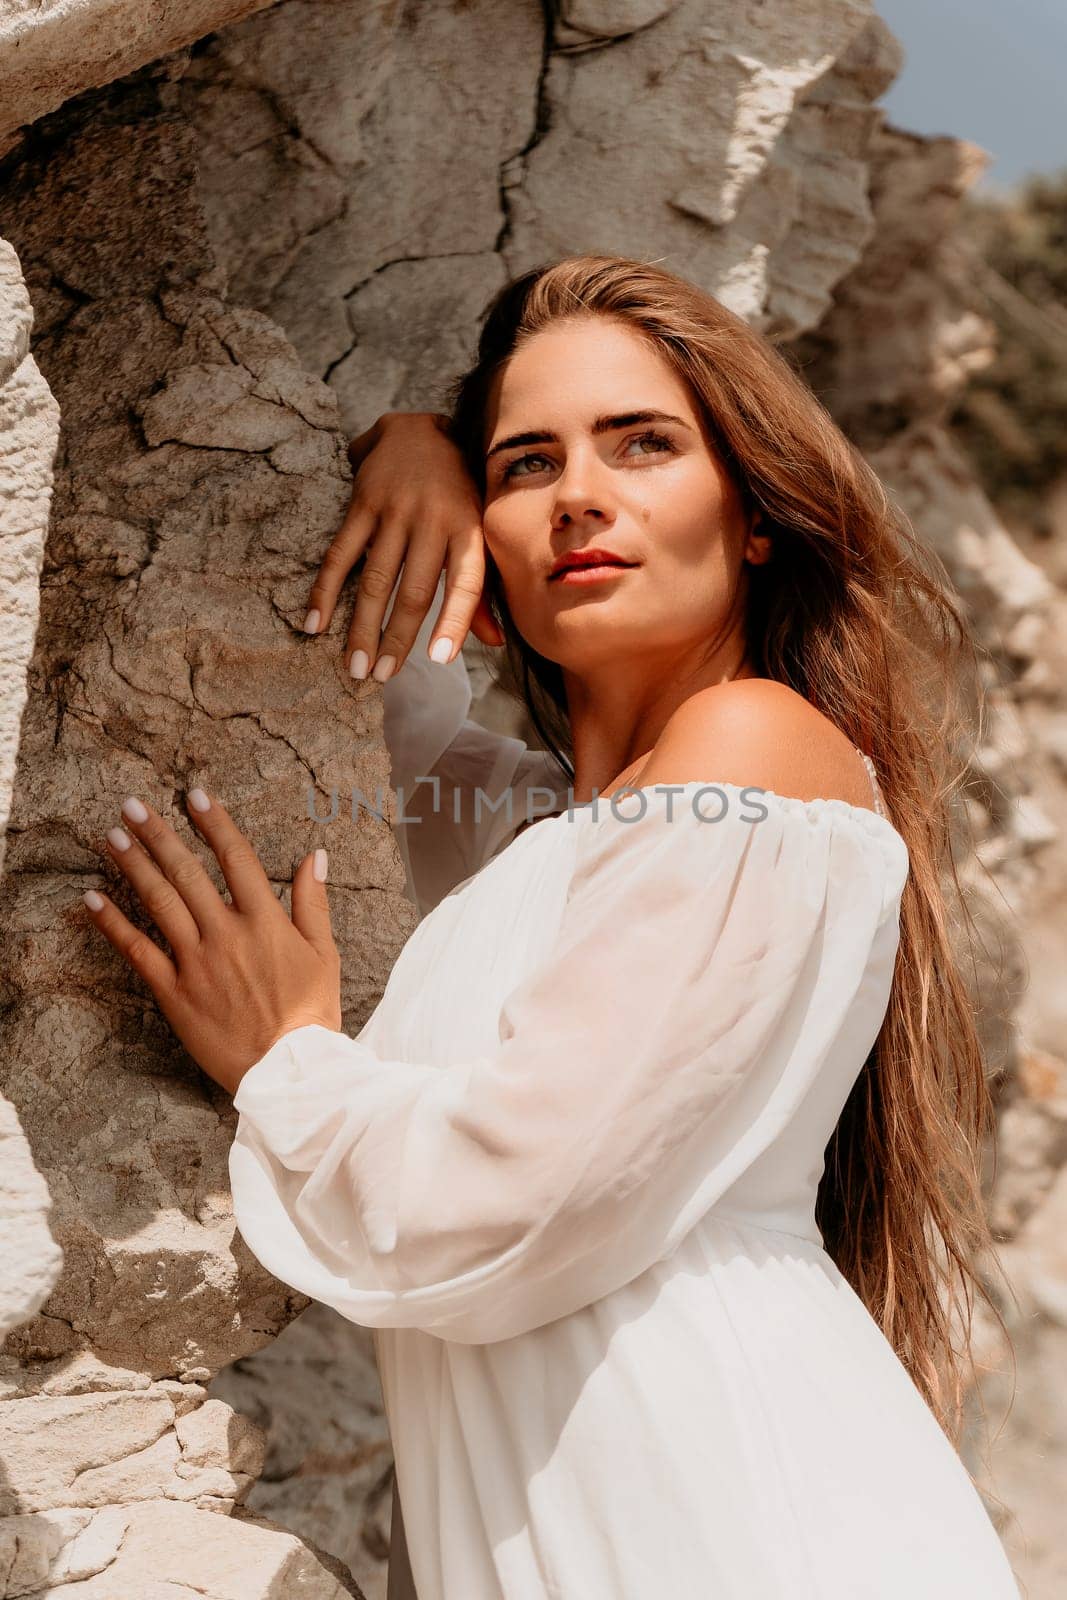 Woman summer travel sea. Happy lady with long hair in white dress enjoy taking photo outdoors for memories. Woman traveler posing on beach at sea surrounded by volcanic mountains, sharing emotions by panophotograph